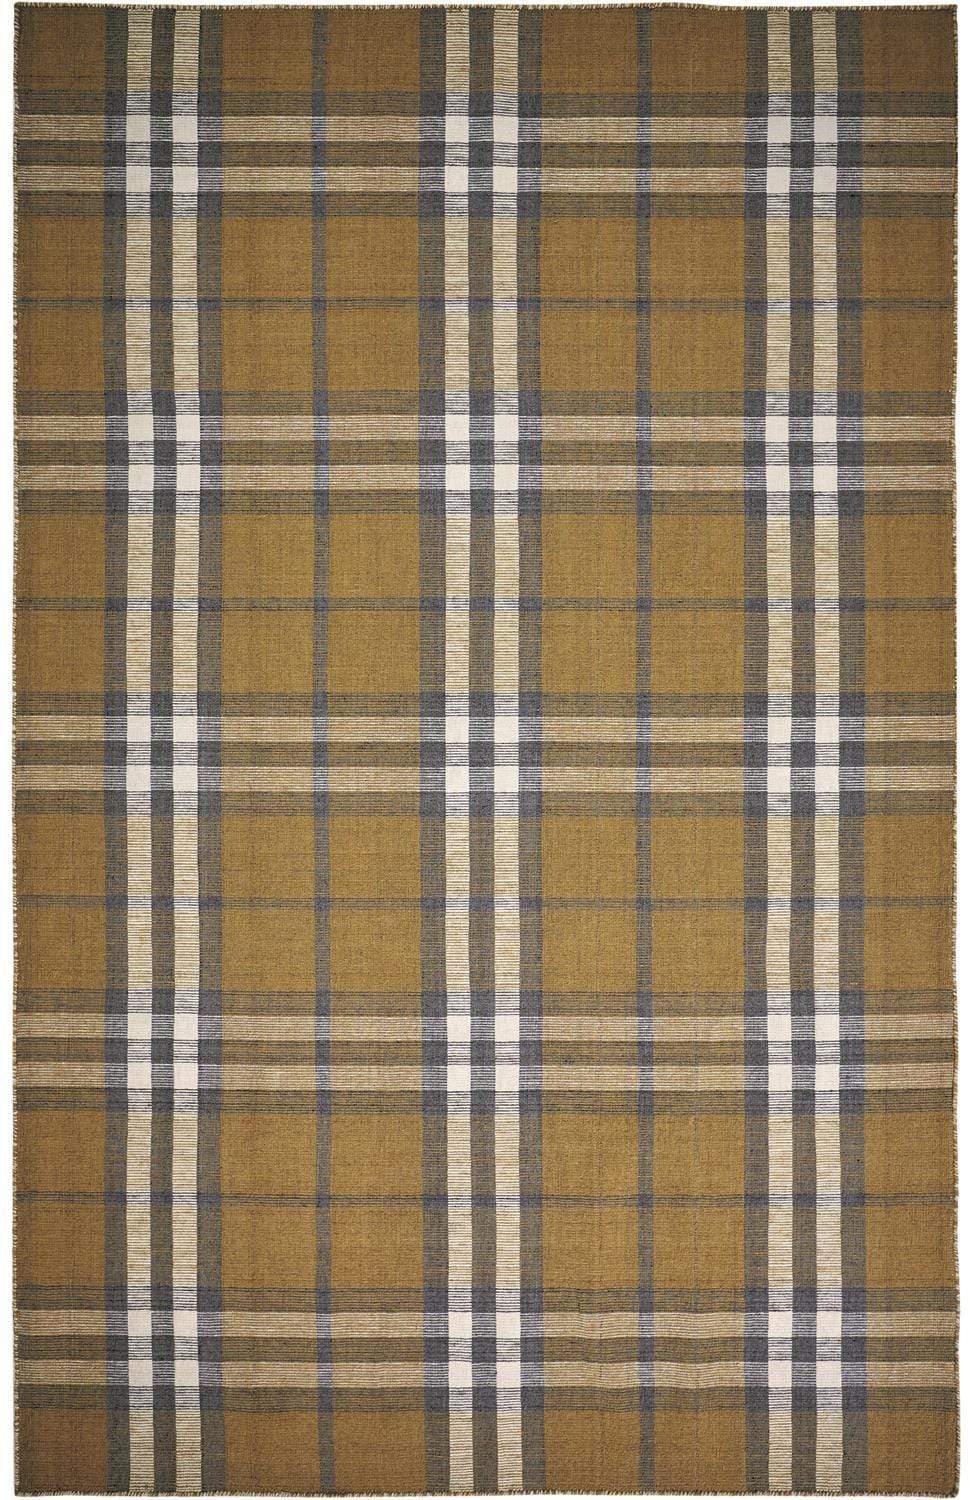 Feizy Feizy Home Crosby Rug - Gold 2' x 3' 8830565FGLD000P00